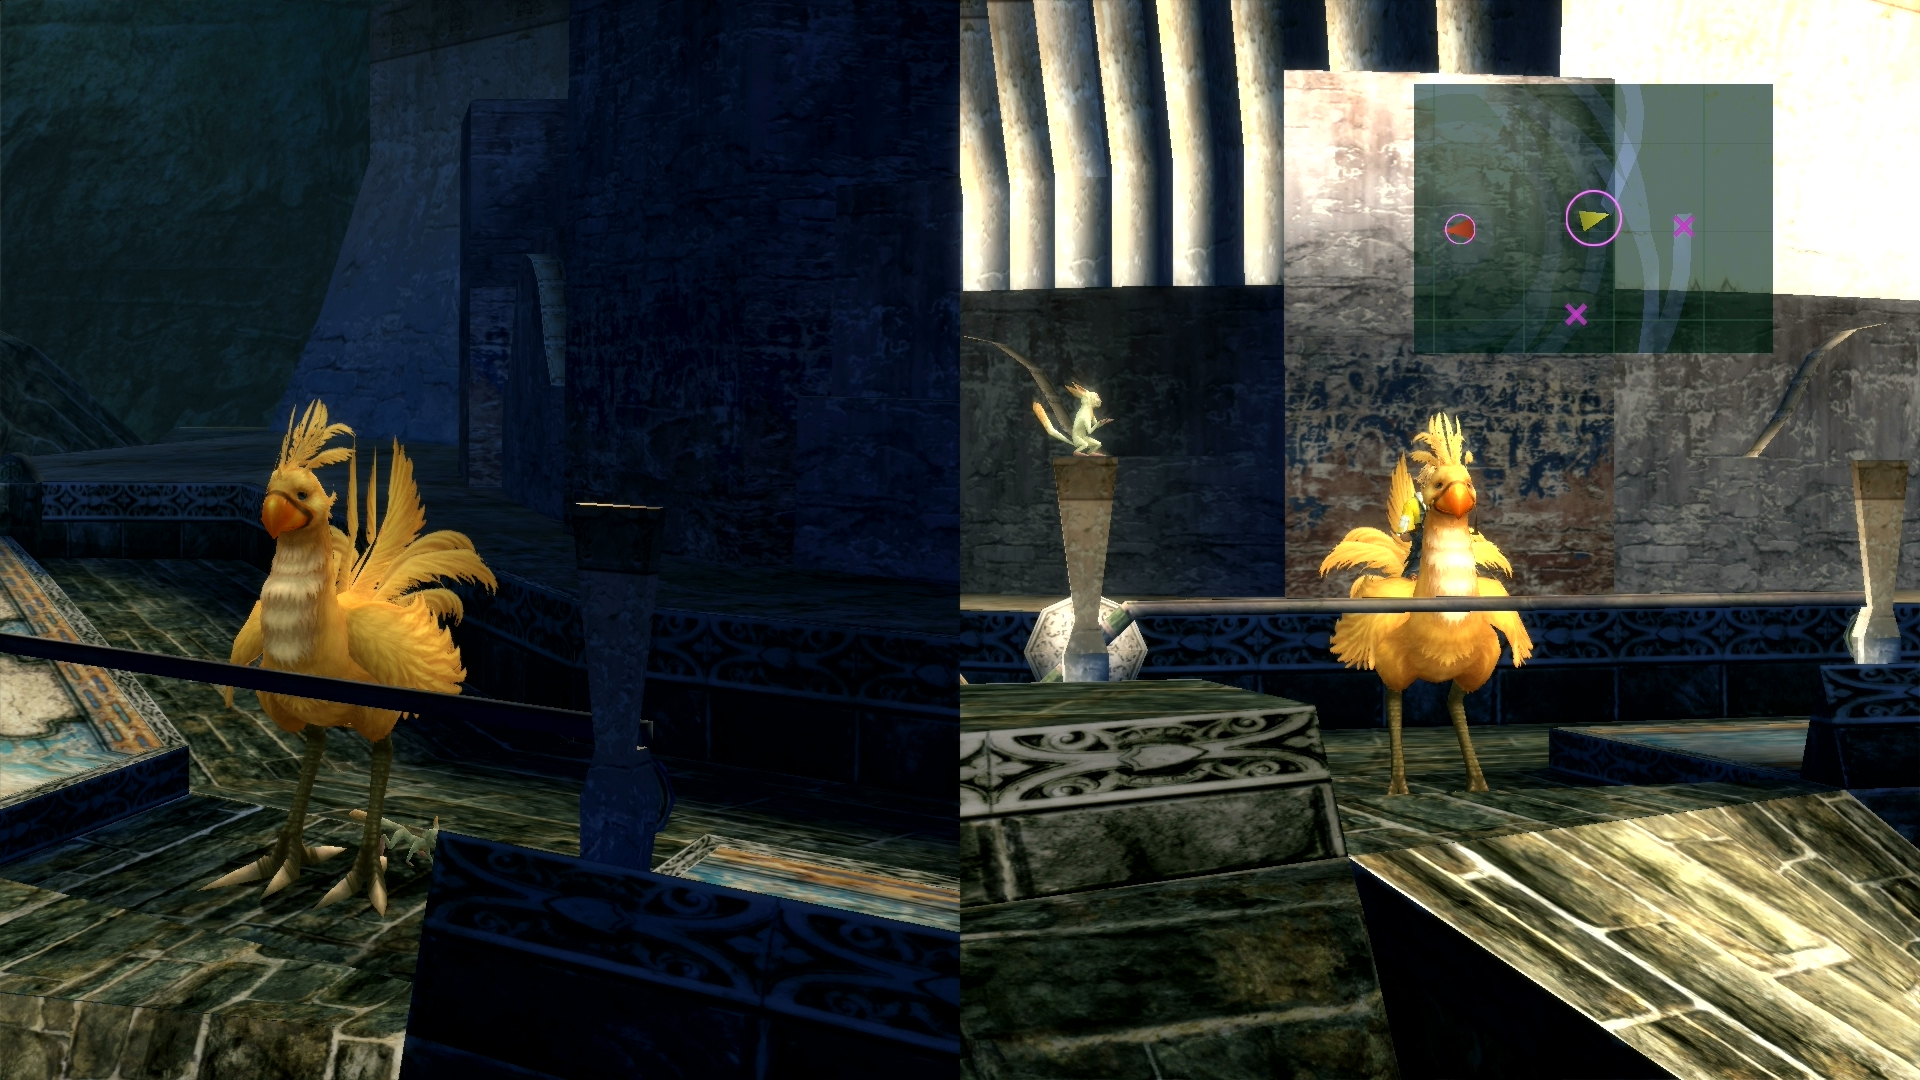 When you’re done with Chocobo racing, enter the temple to find Belgemine. 